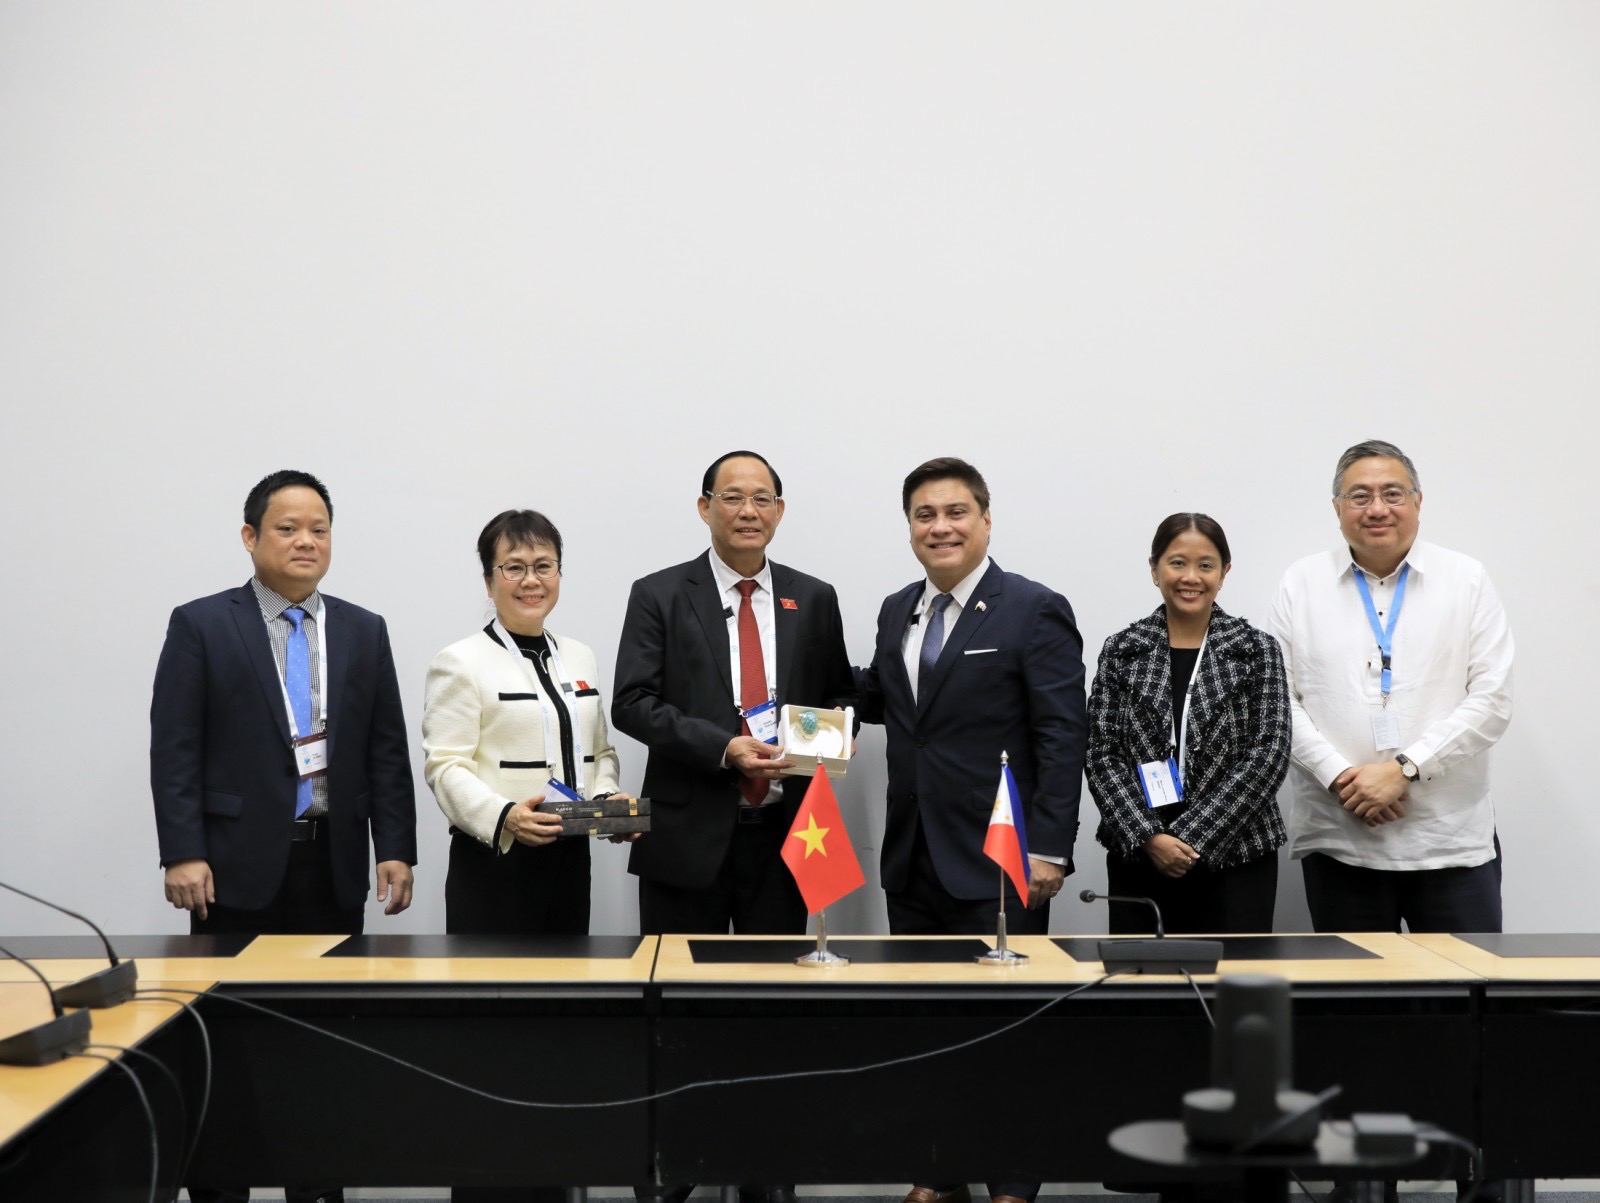 PH, Vietnamese solons discuss defense cooperation at IPU sidelines